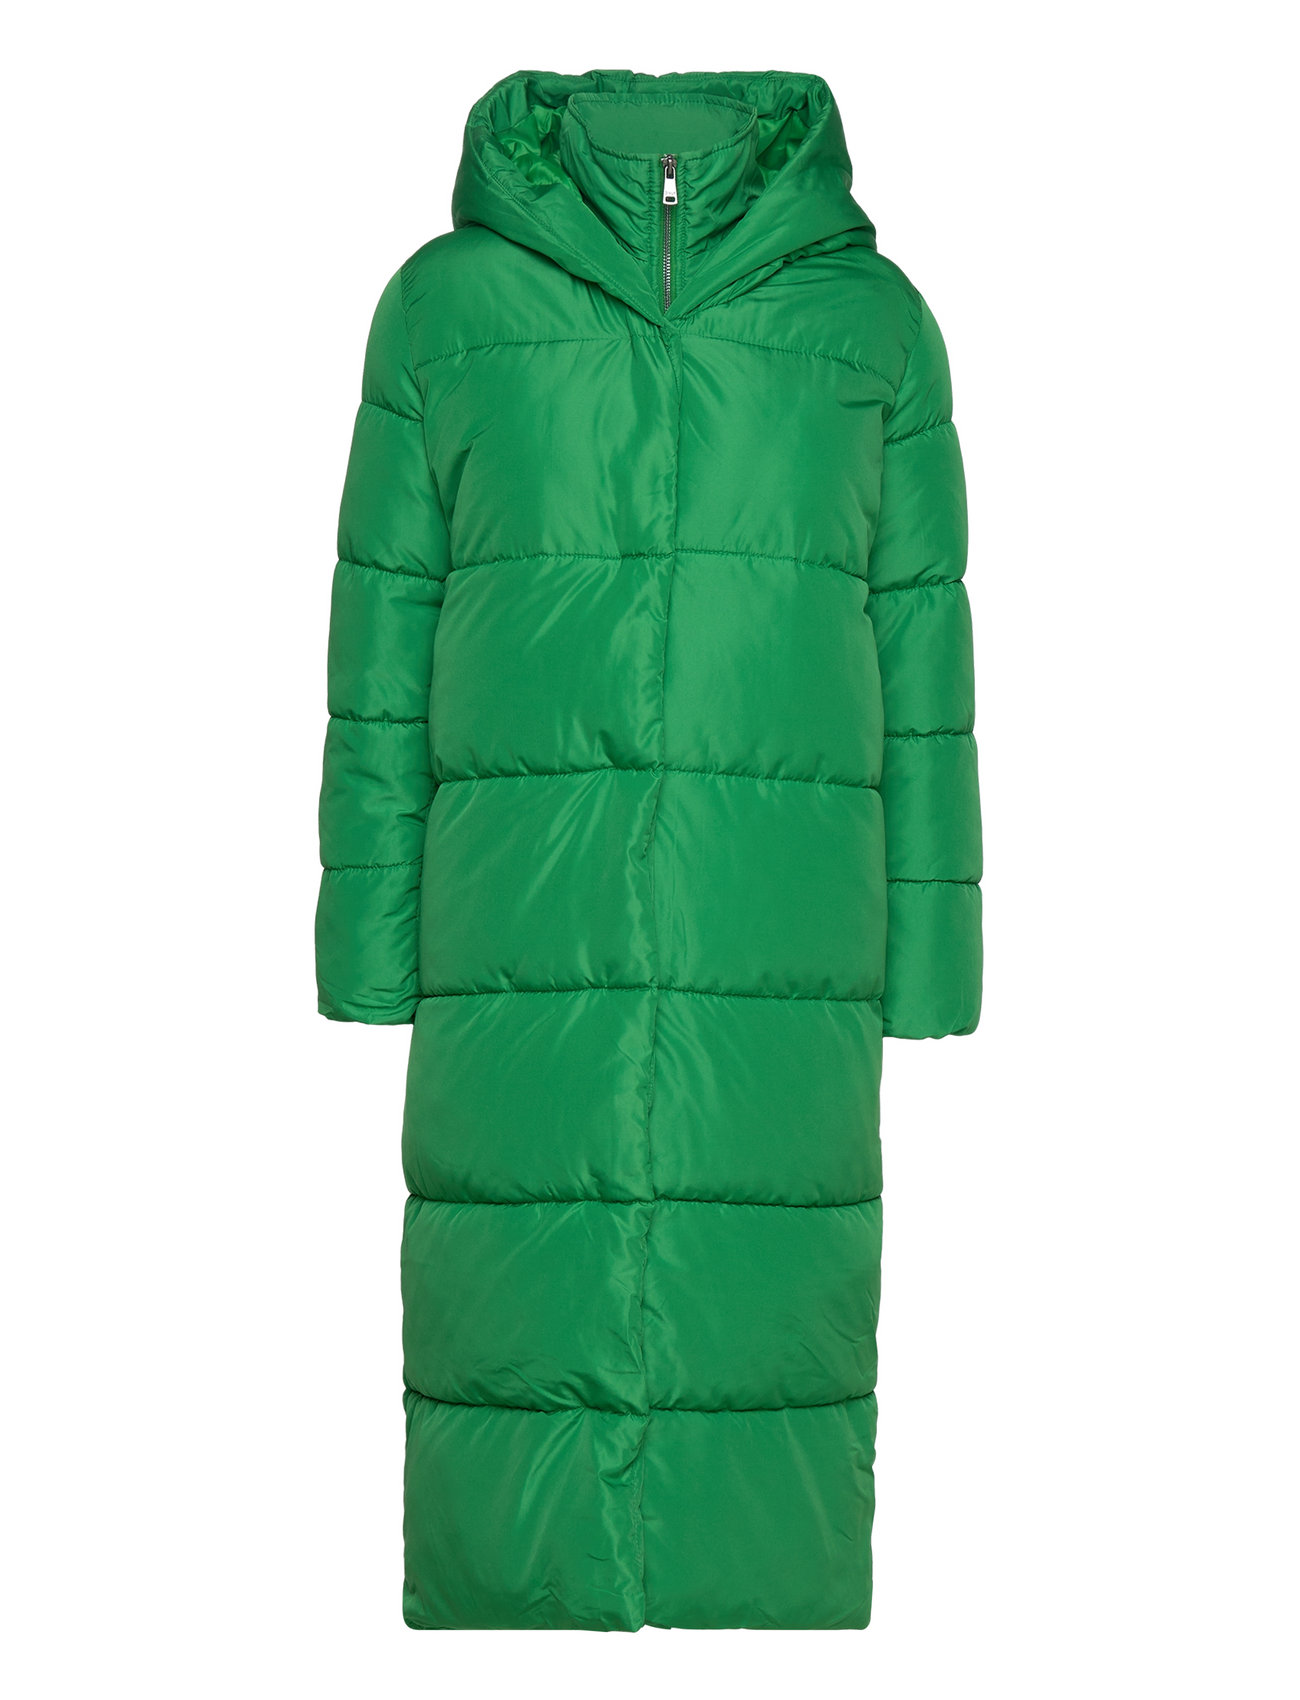 ONLY Onlamy X Otw Fast delivery Coats Long Padded ONLY from €. Boozt.com. Puffer 89.99 at Coat Buy and easy - returns online